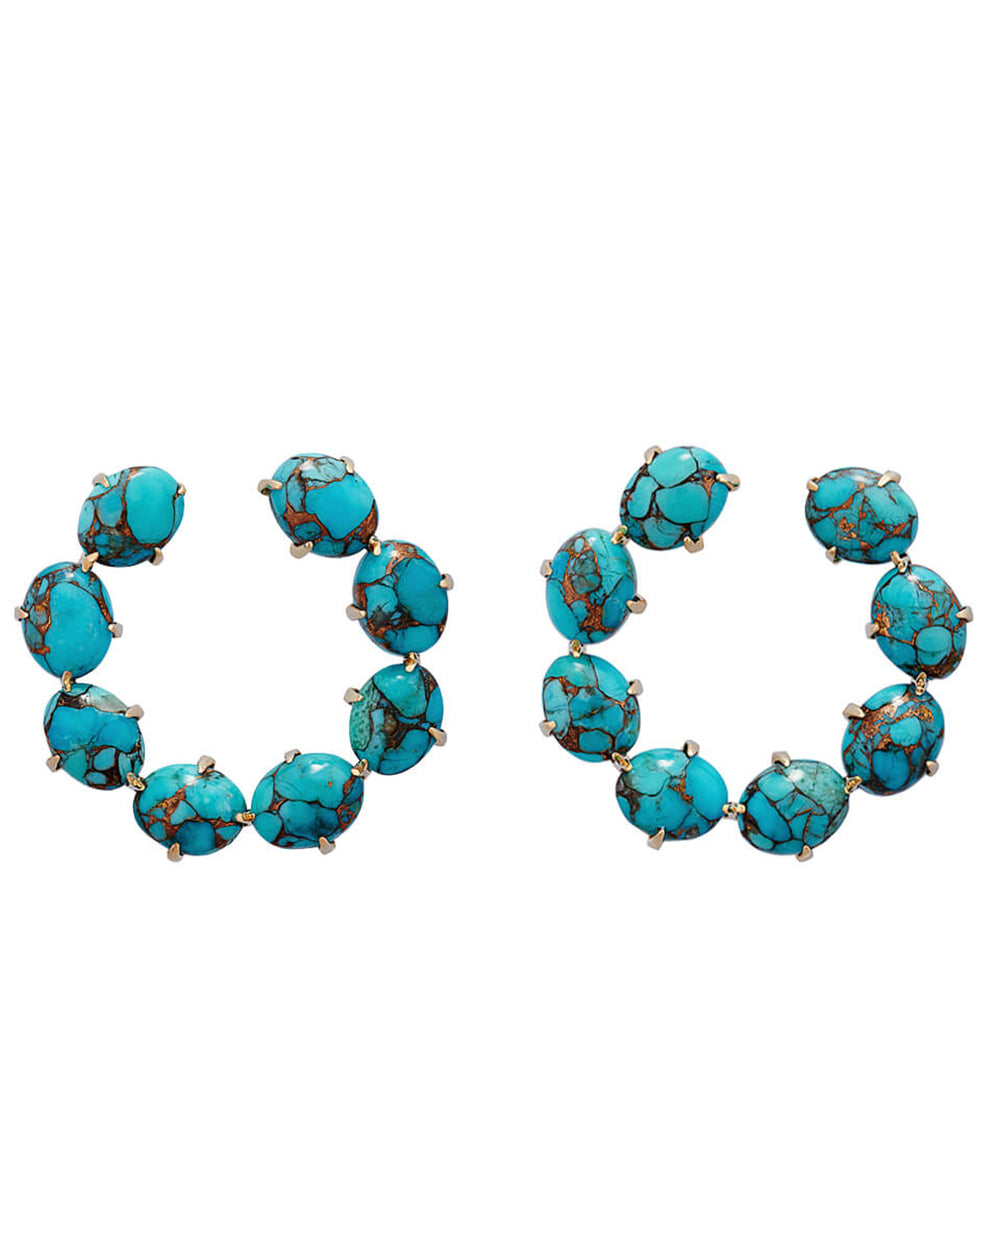 OC05 Earrings with turquoise